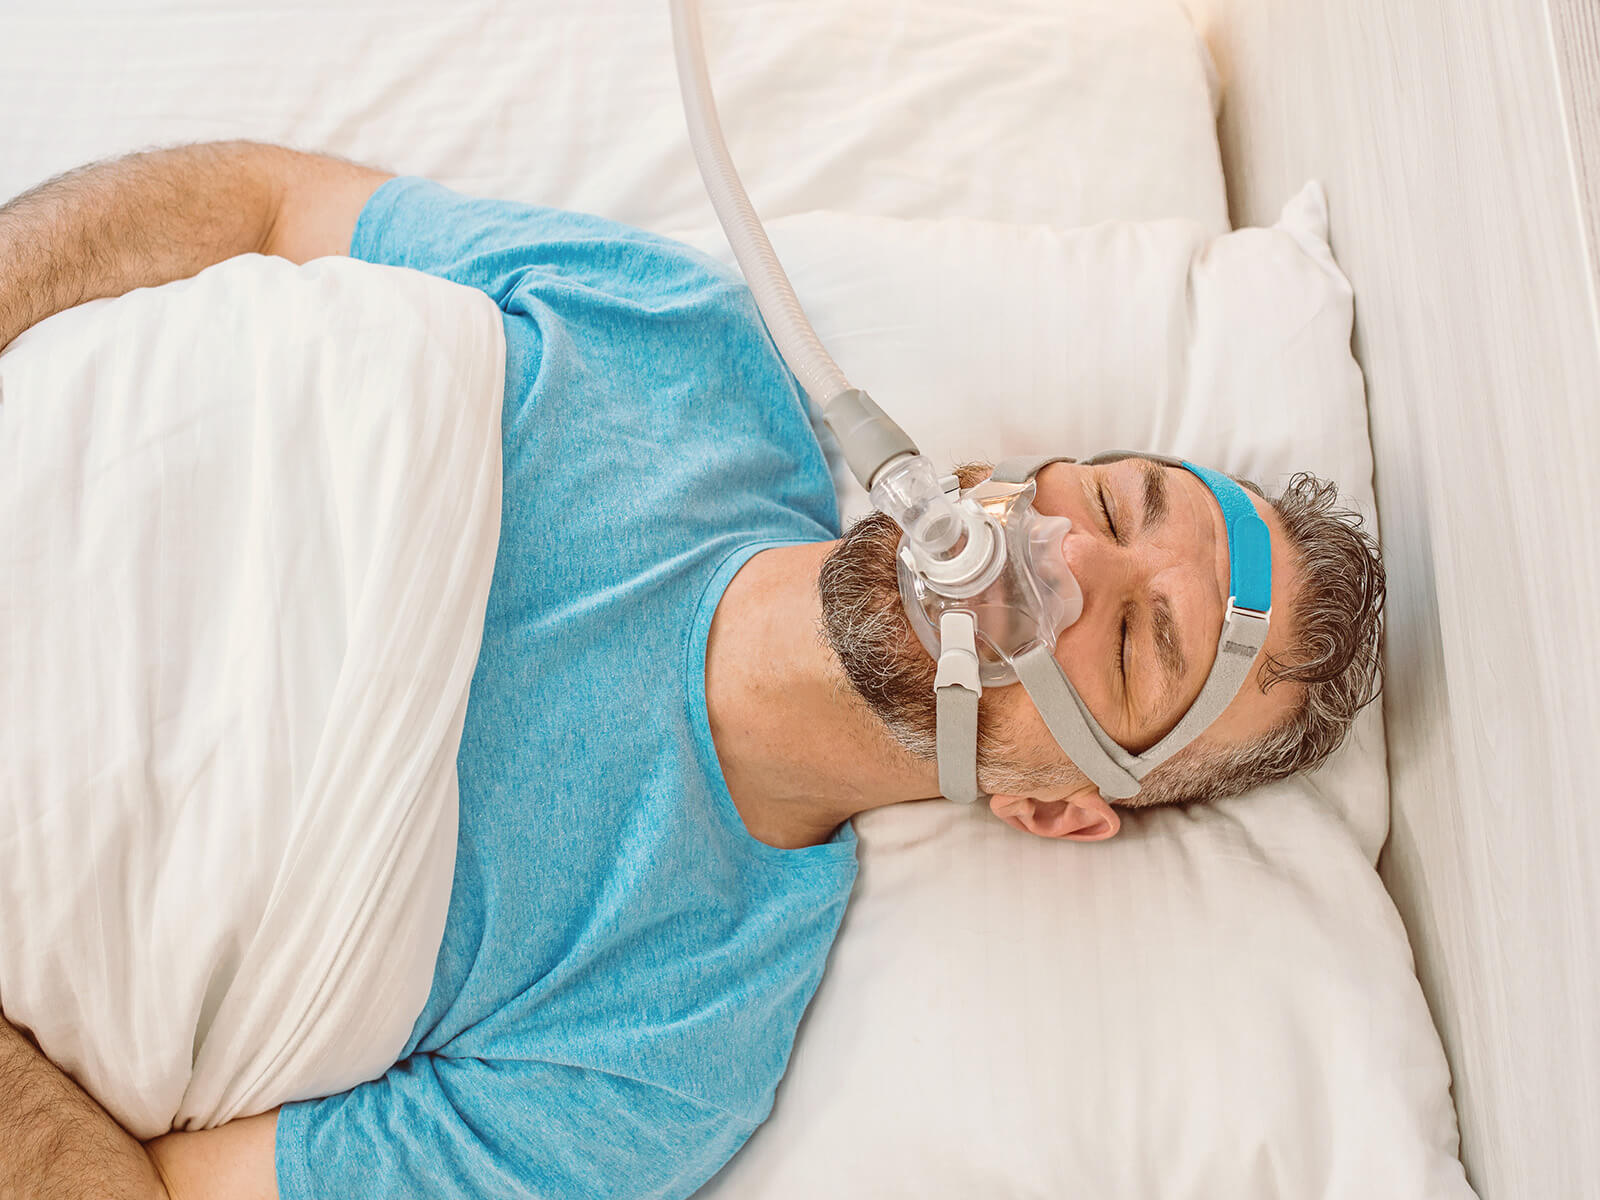 What Are The Warning Signs of Sleep Apnea?